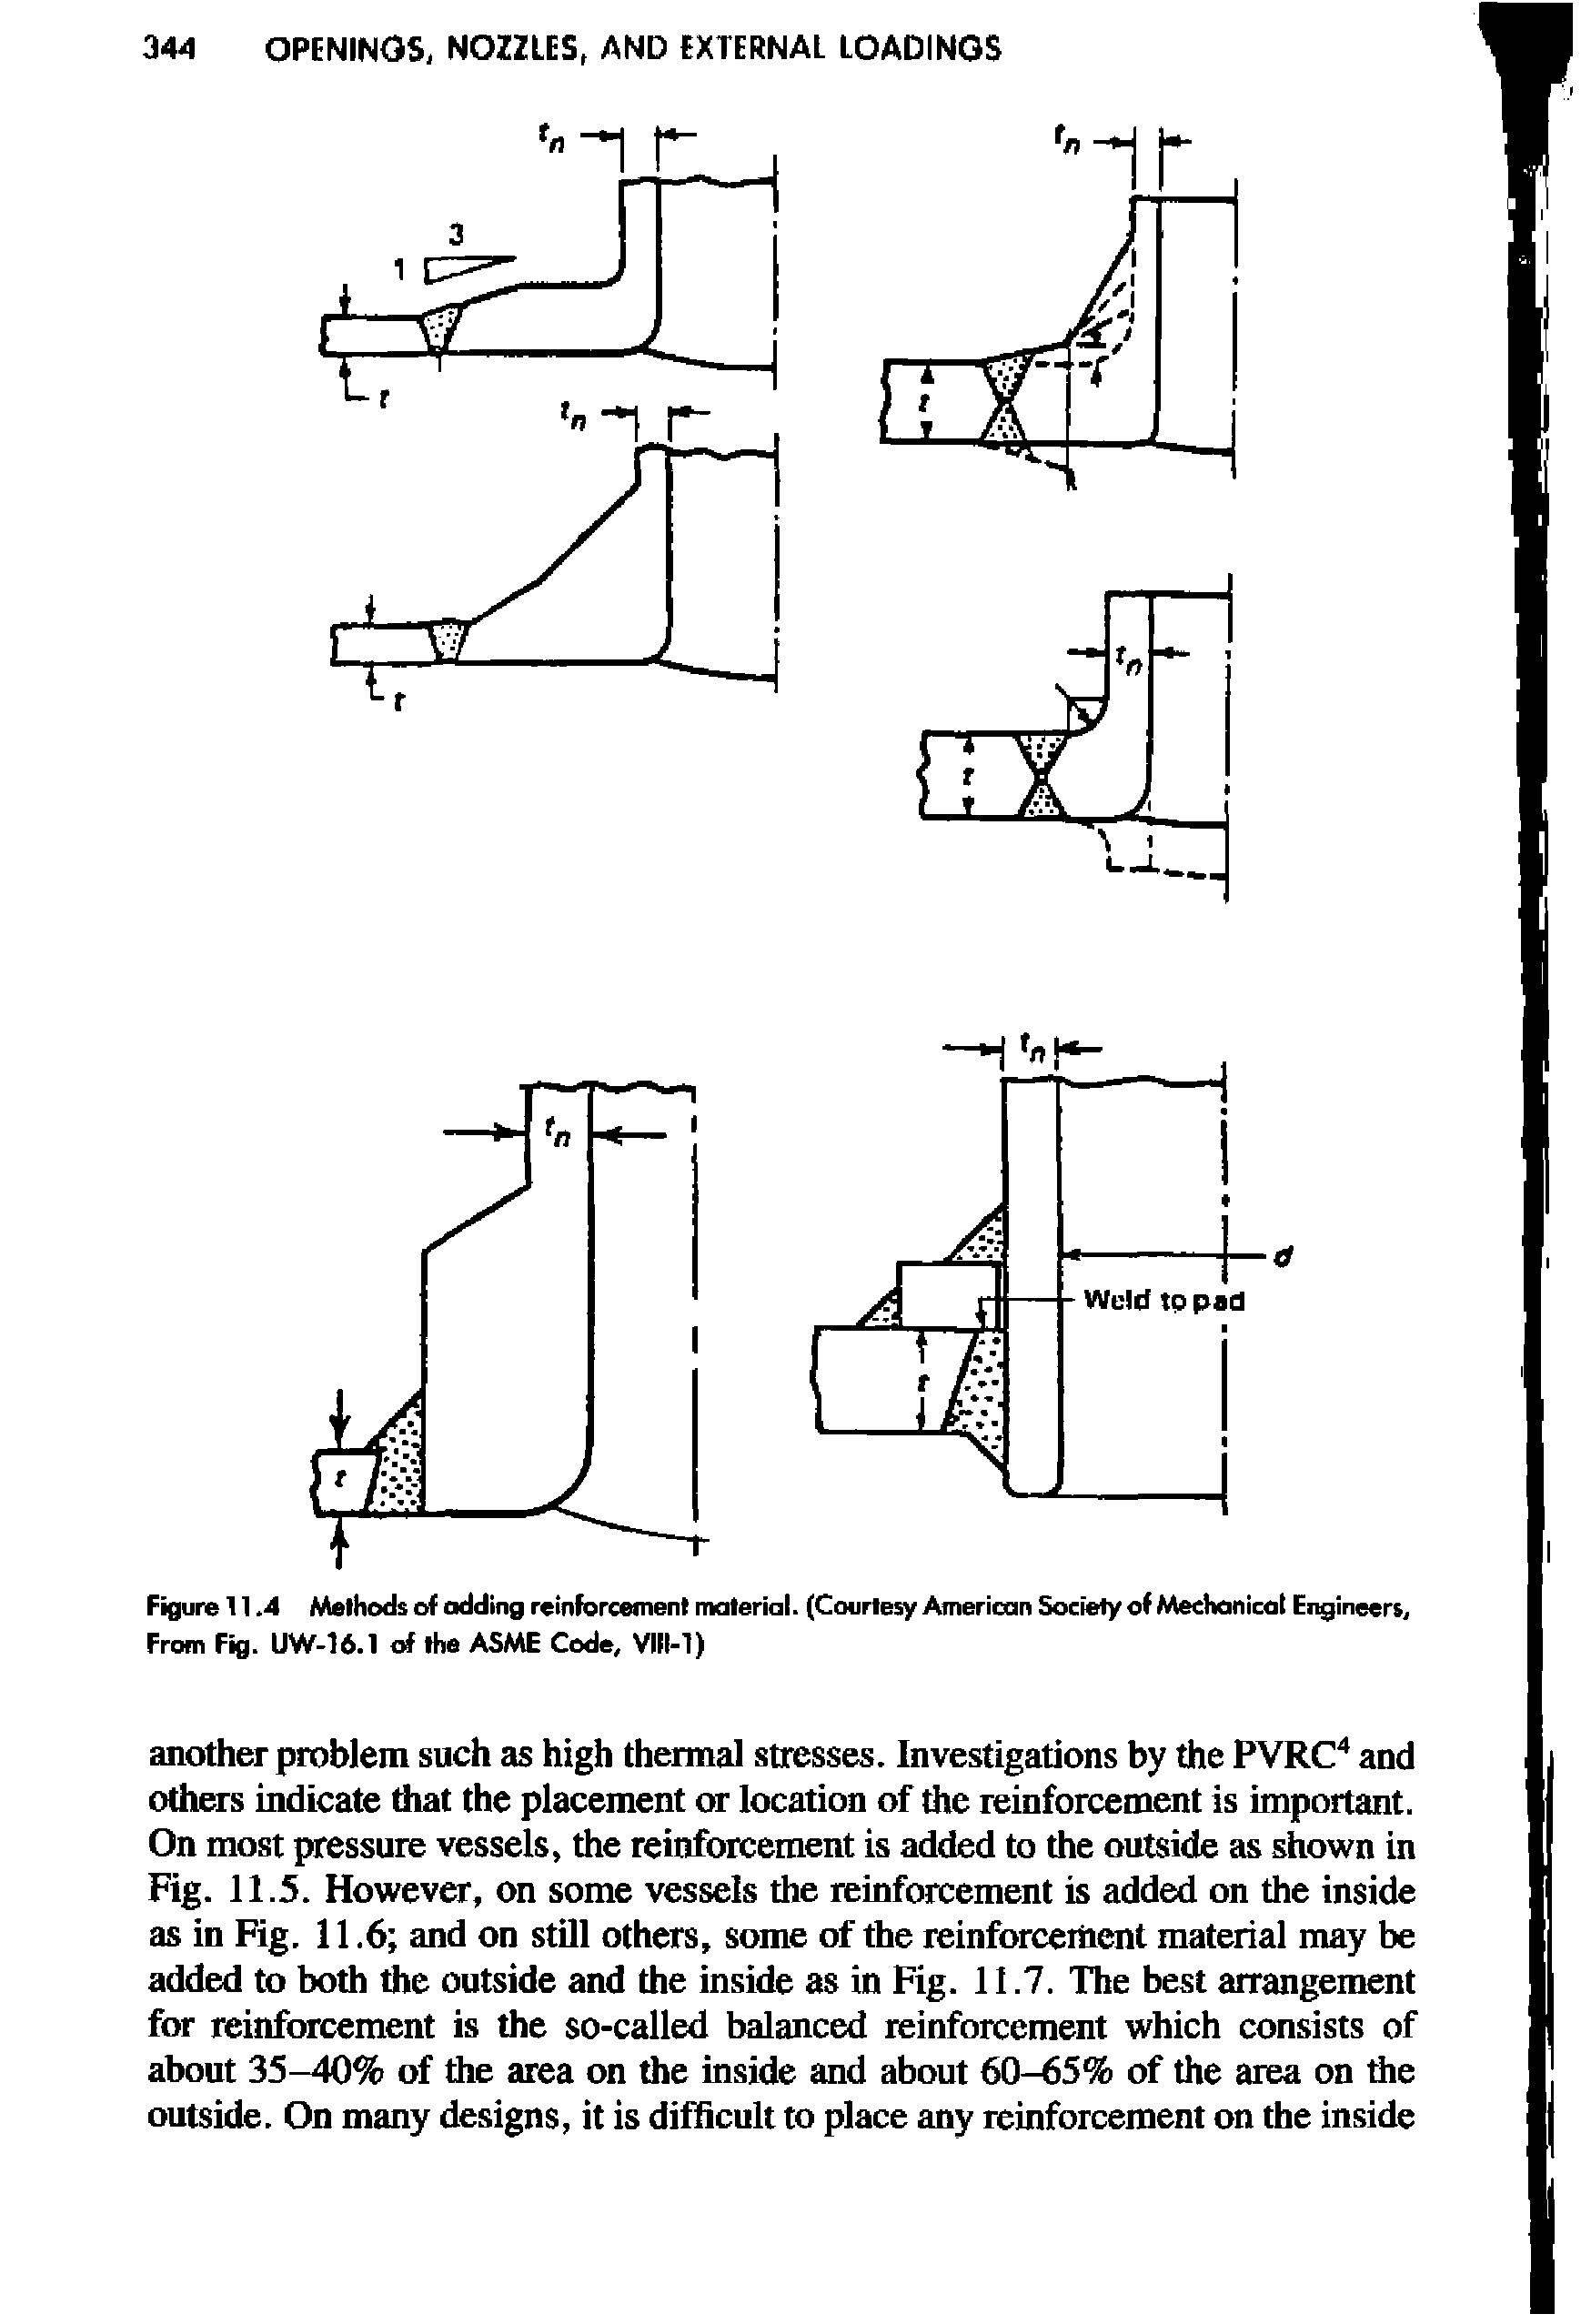 Figure 11.4 Methods of adding reinforcement material. (Courtesy American Society of AAechanicat Engineers, From Fig. UW-16.1 of the ASME Code, VIII-1)...